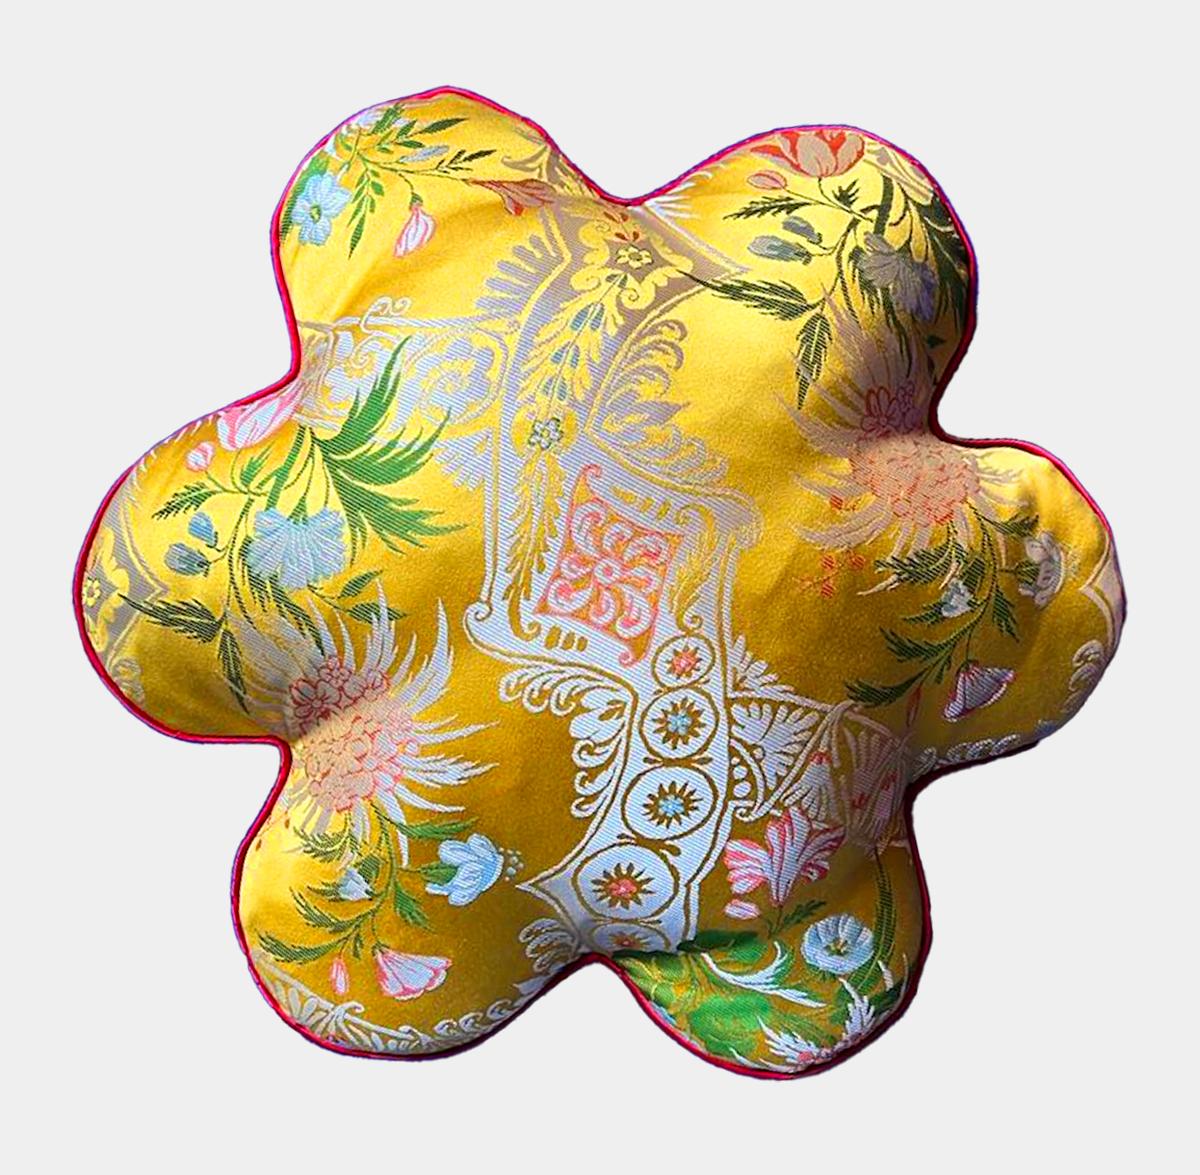 The Flower cushion, the result of a collaboration between Uchronia and the Prelle silk factory to coincide with the 